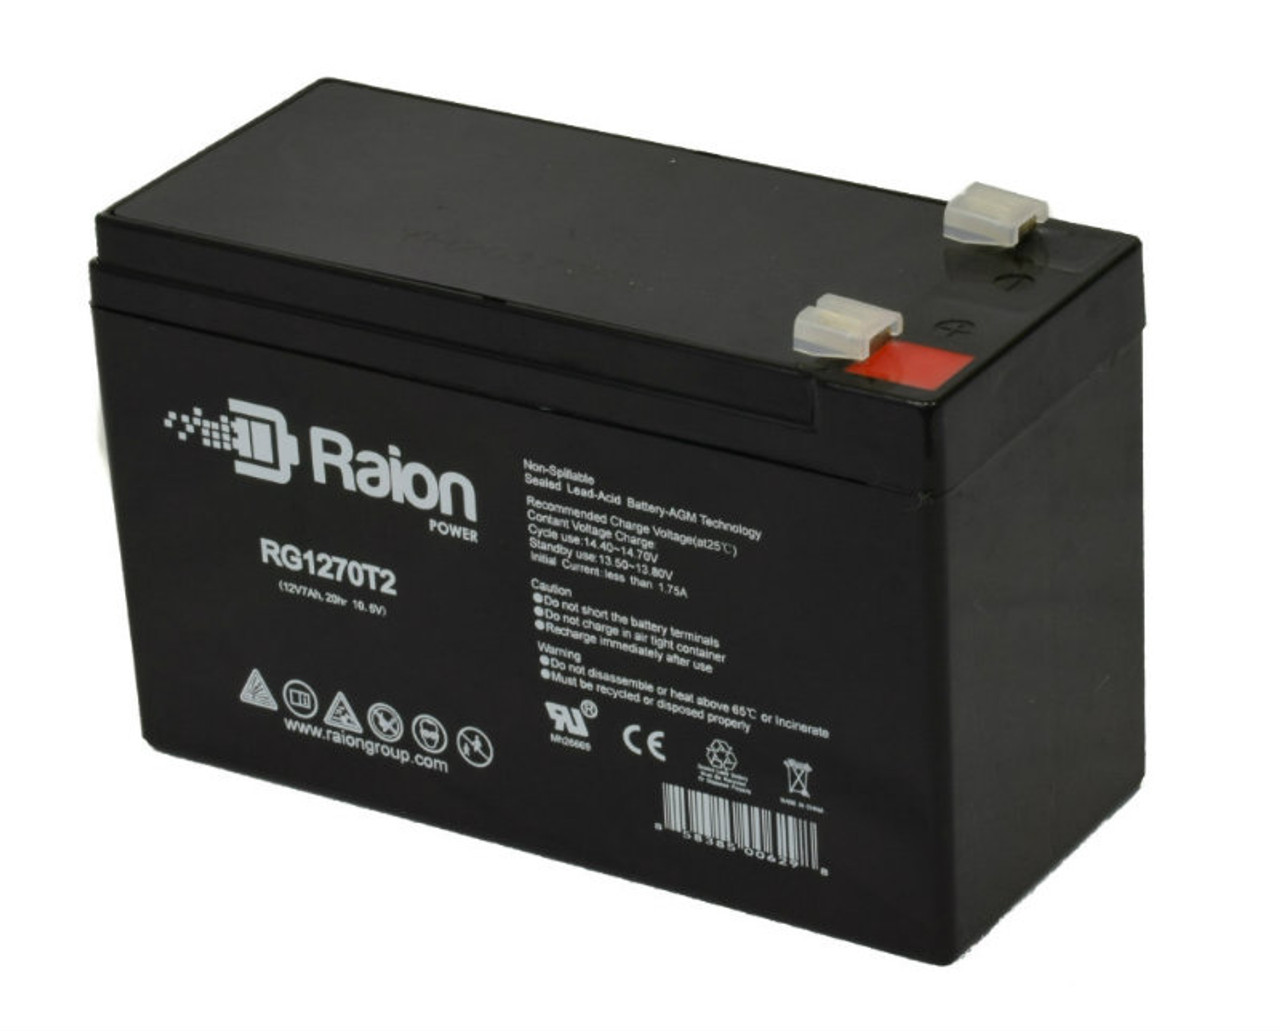 Raion Power Replacement 12V 7Ah Battery for Razor 13111402 Power Core 90 Electric-Powered Scooter - 1 Pack